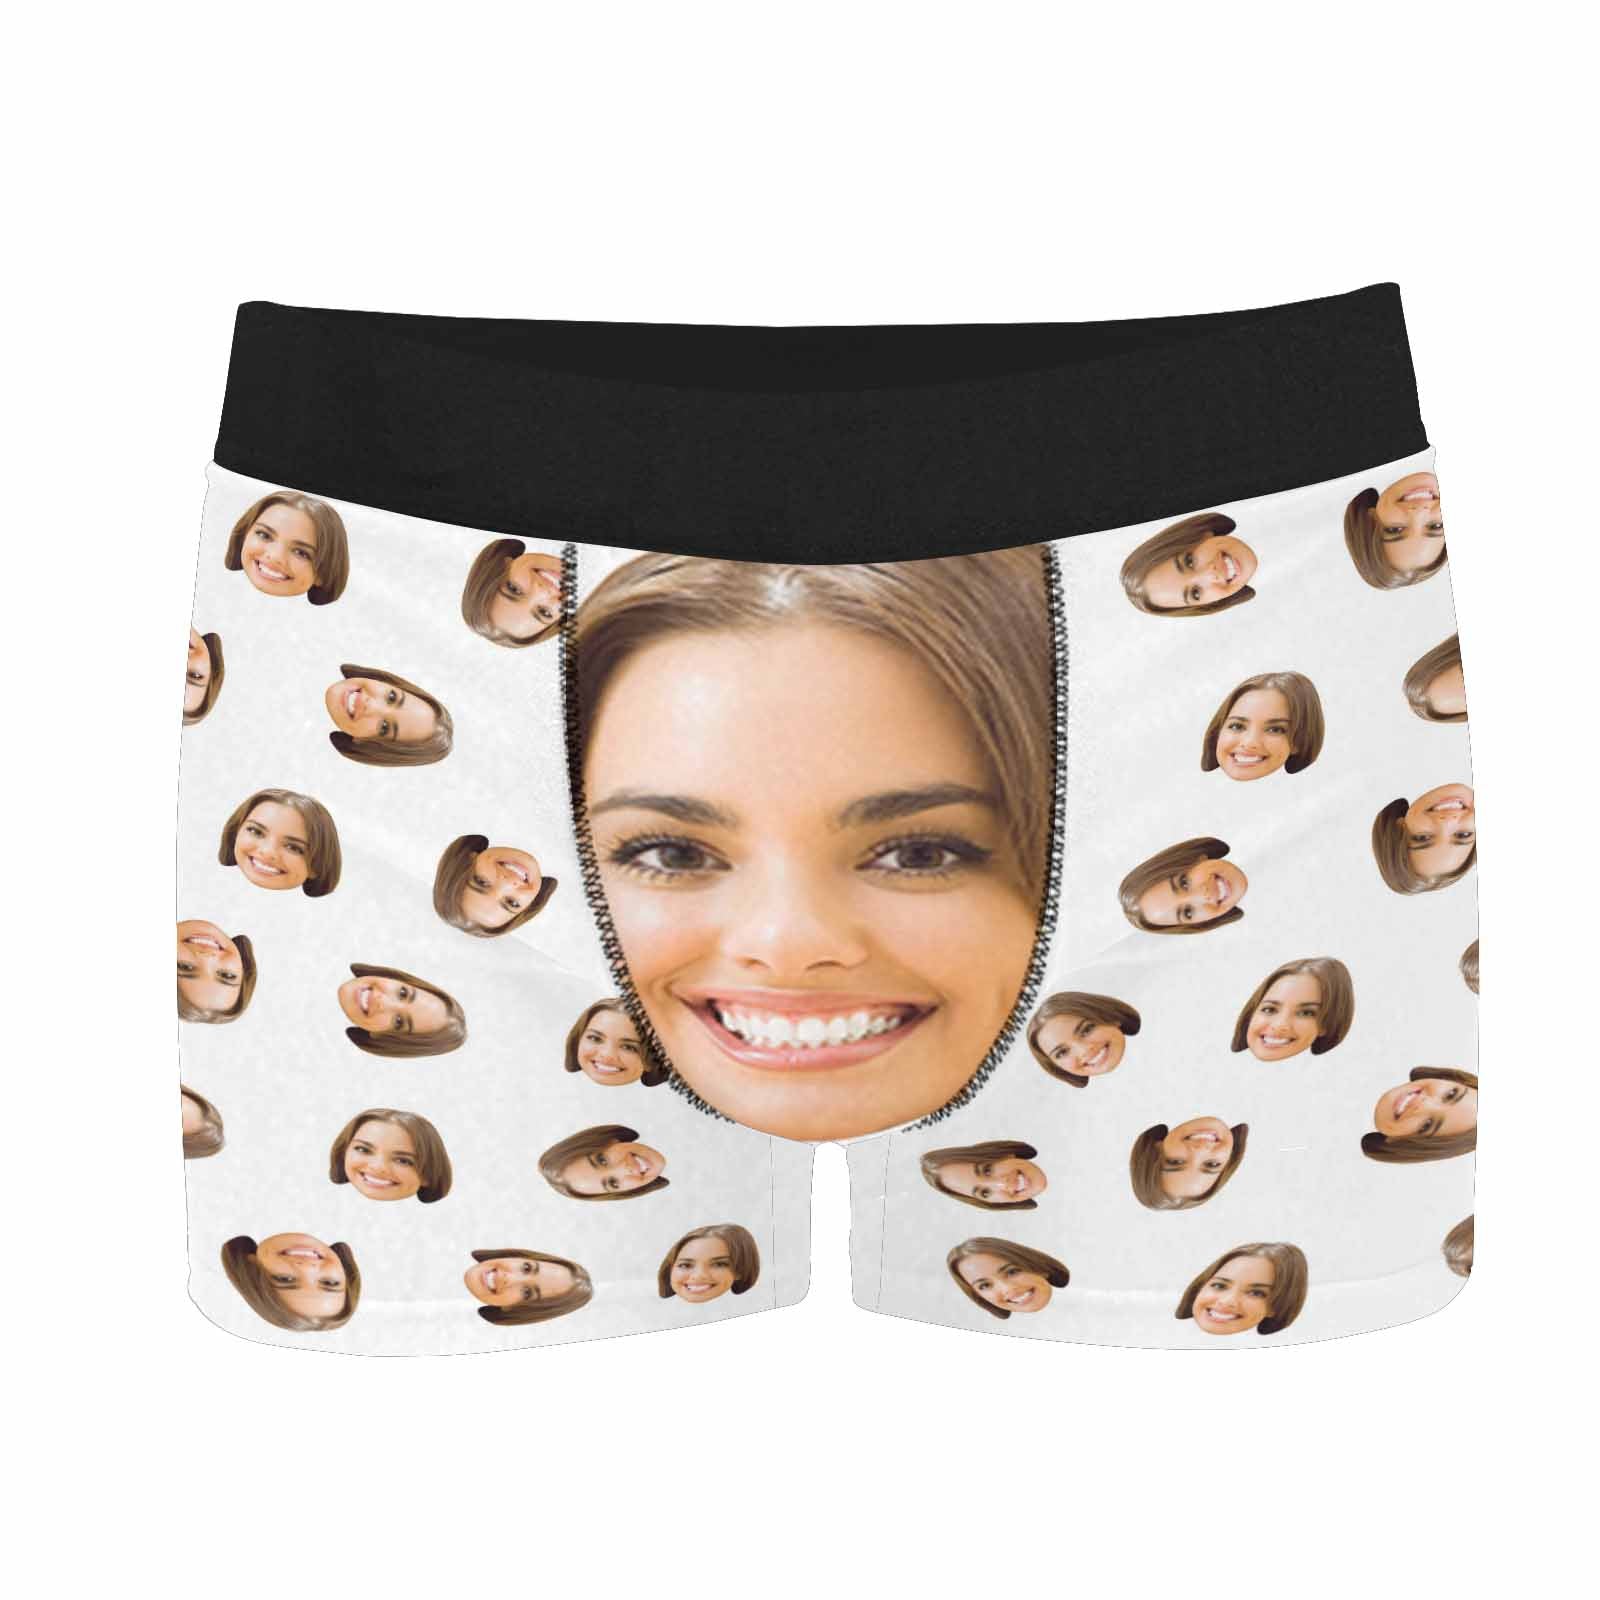 Customized Underwear with Wife for Him, Custom Boxers for Men with